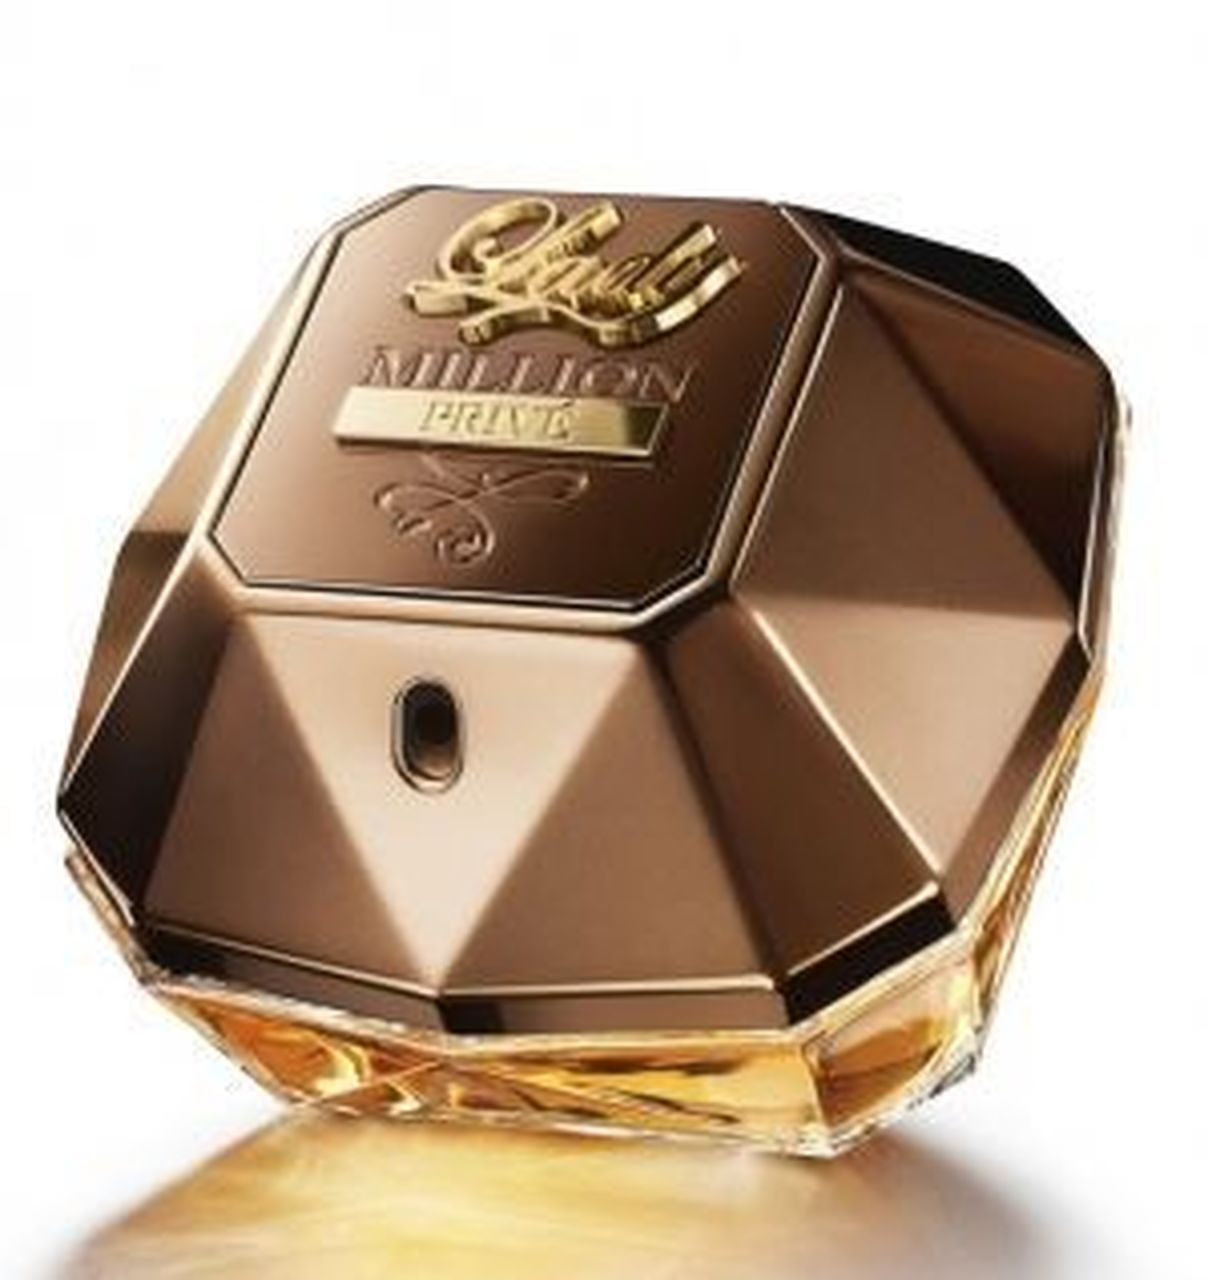 Buy Lady Million Prive by Paco Rabanne for Women EDP 80mL | Arablly.com